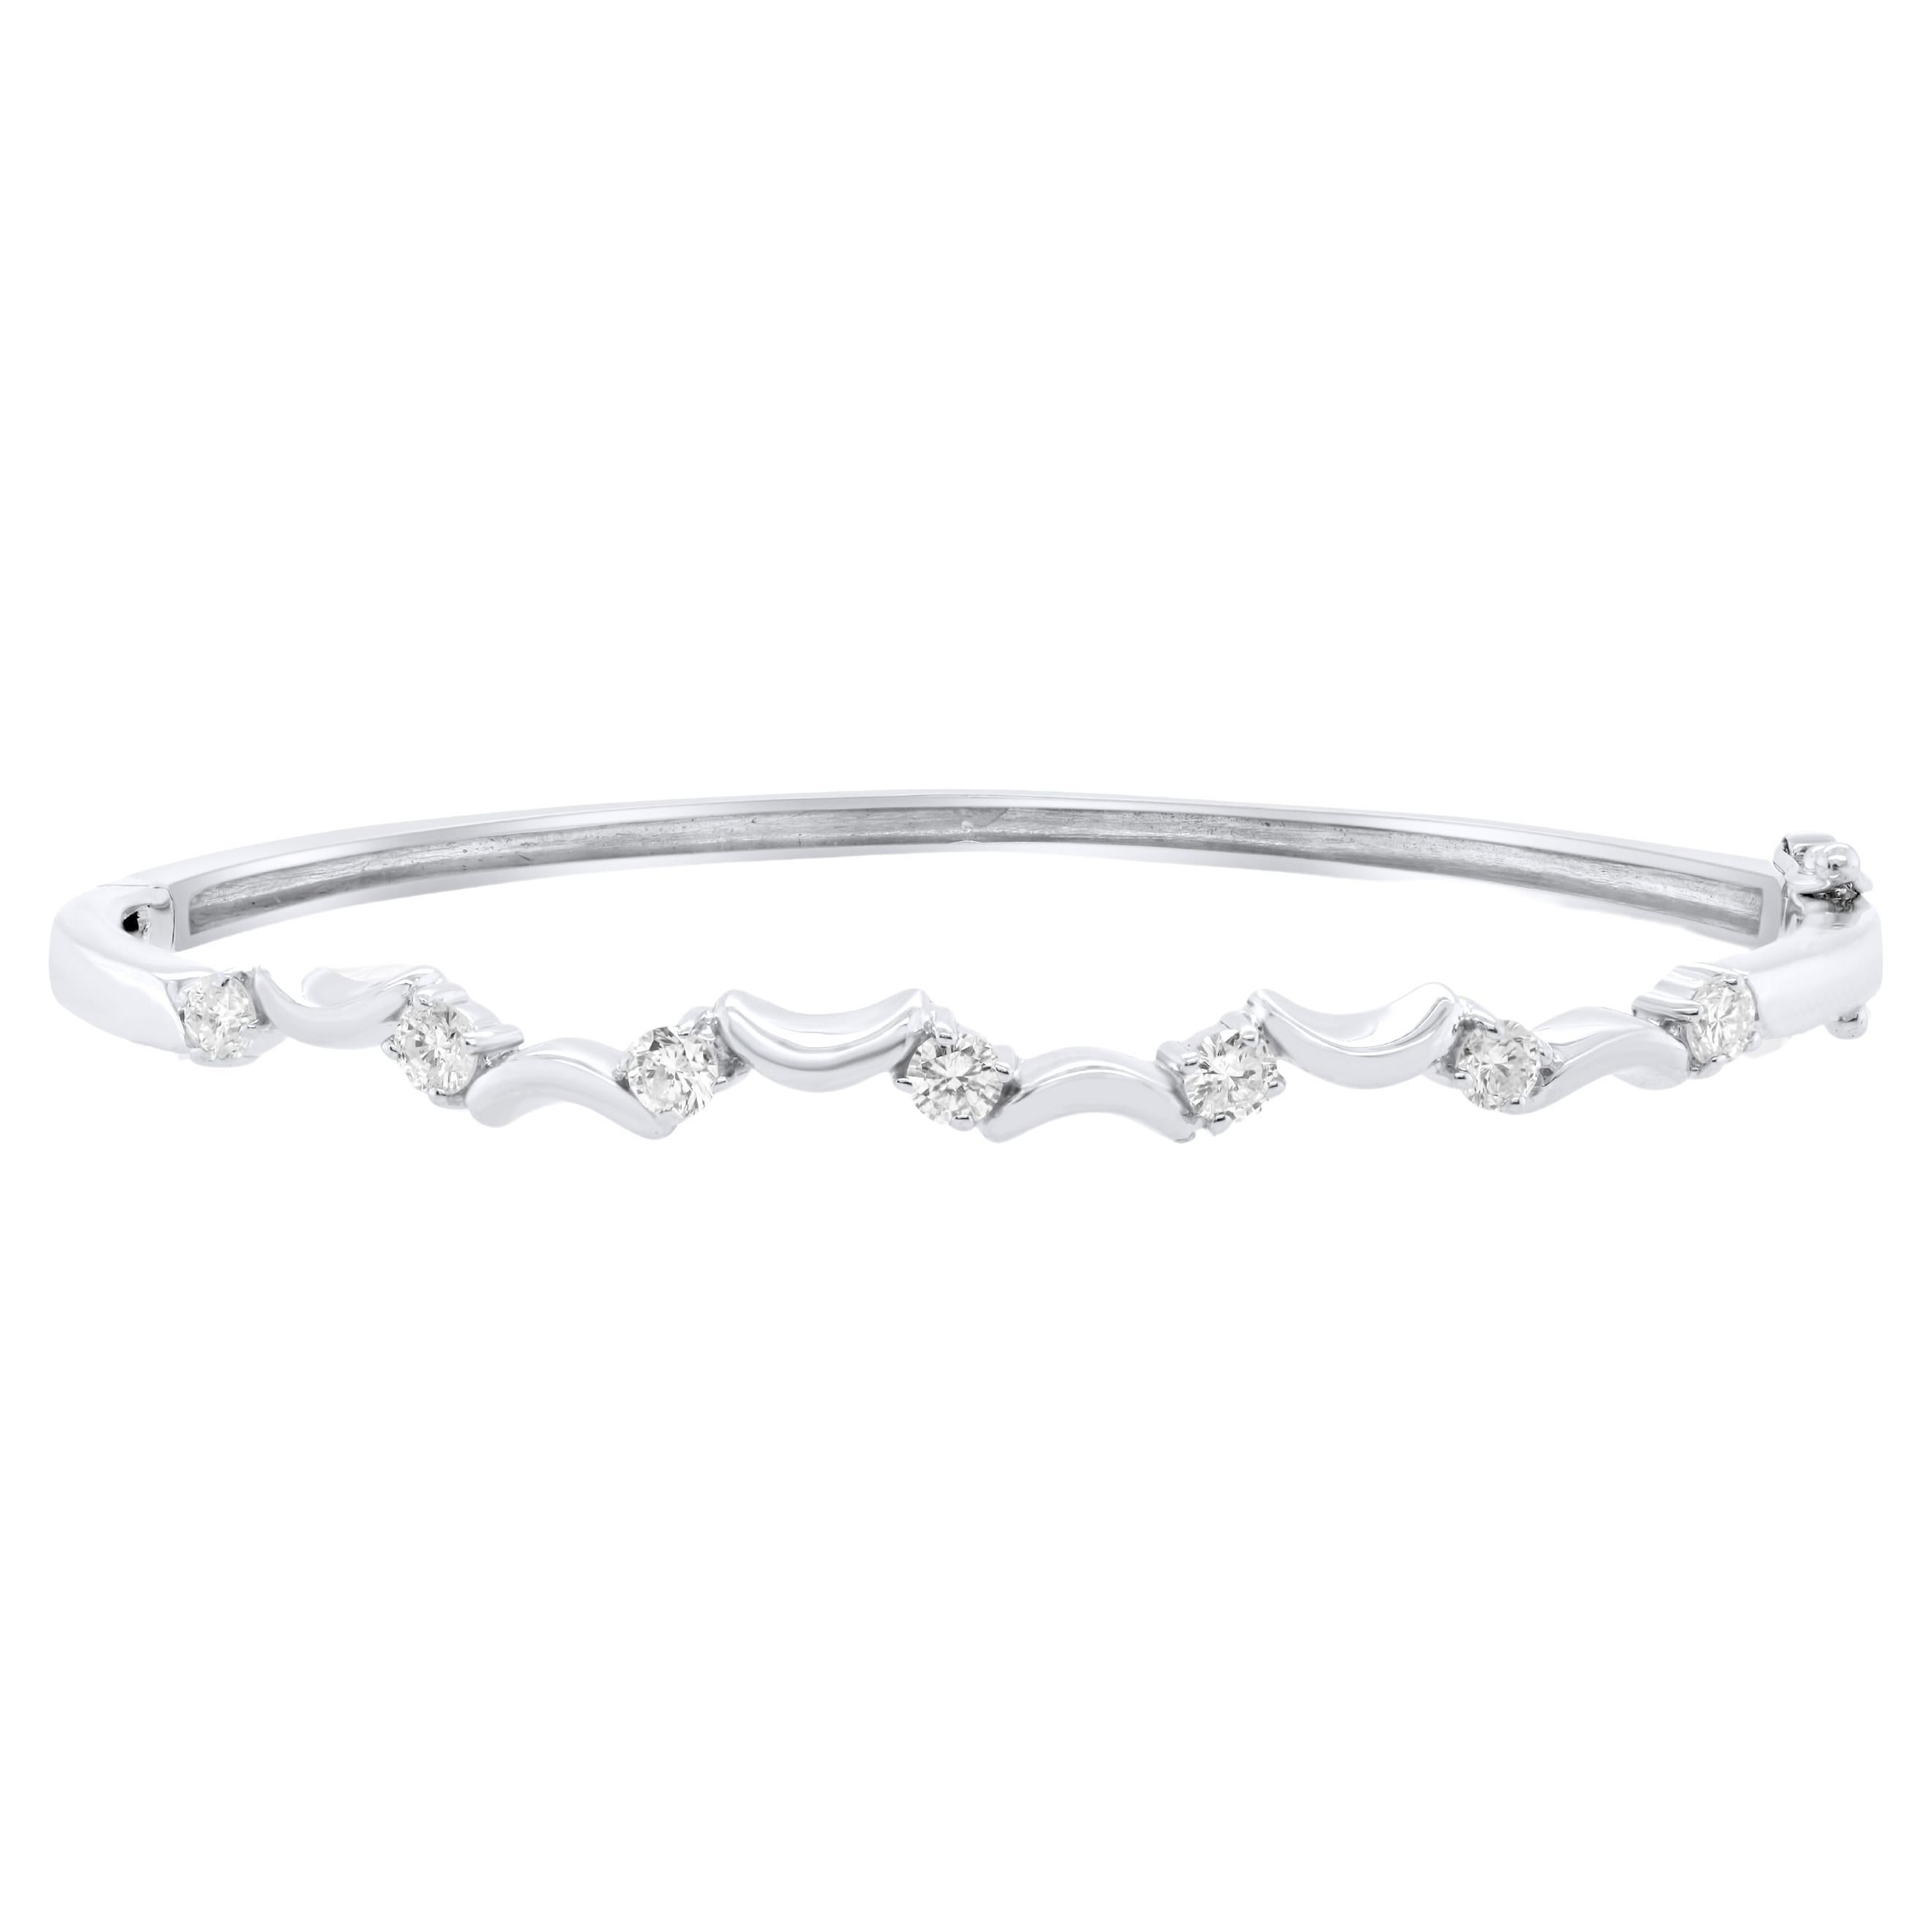 Diana M 0.35cts Diamond Fashion Bangle in 14K White Gold For Sale